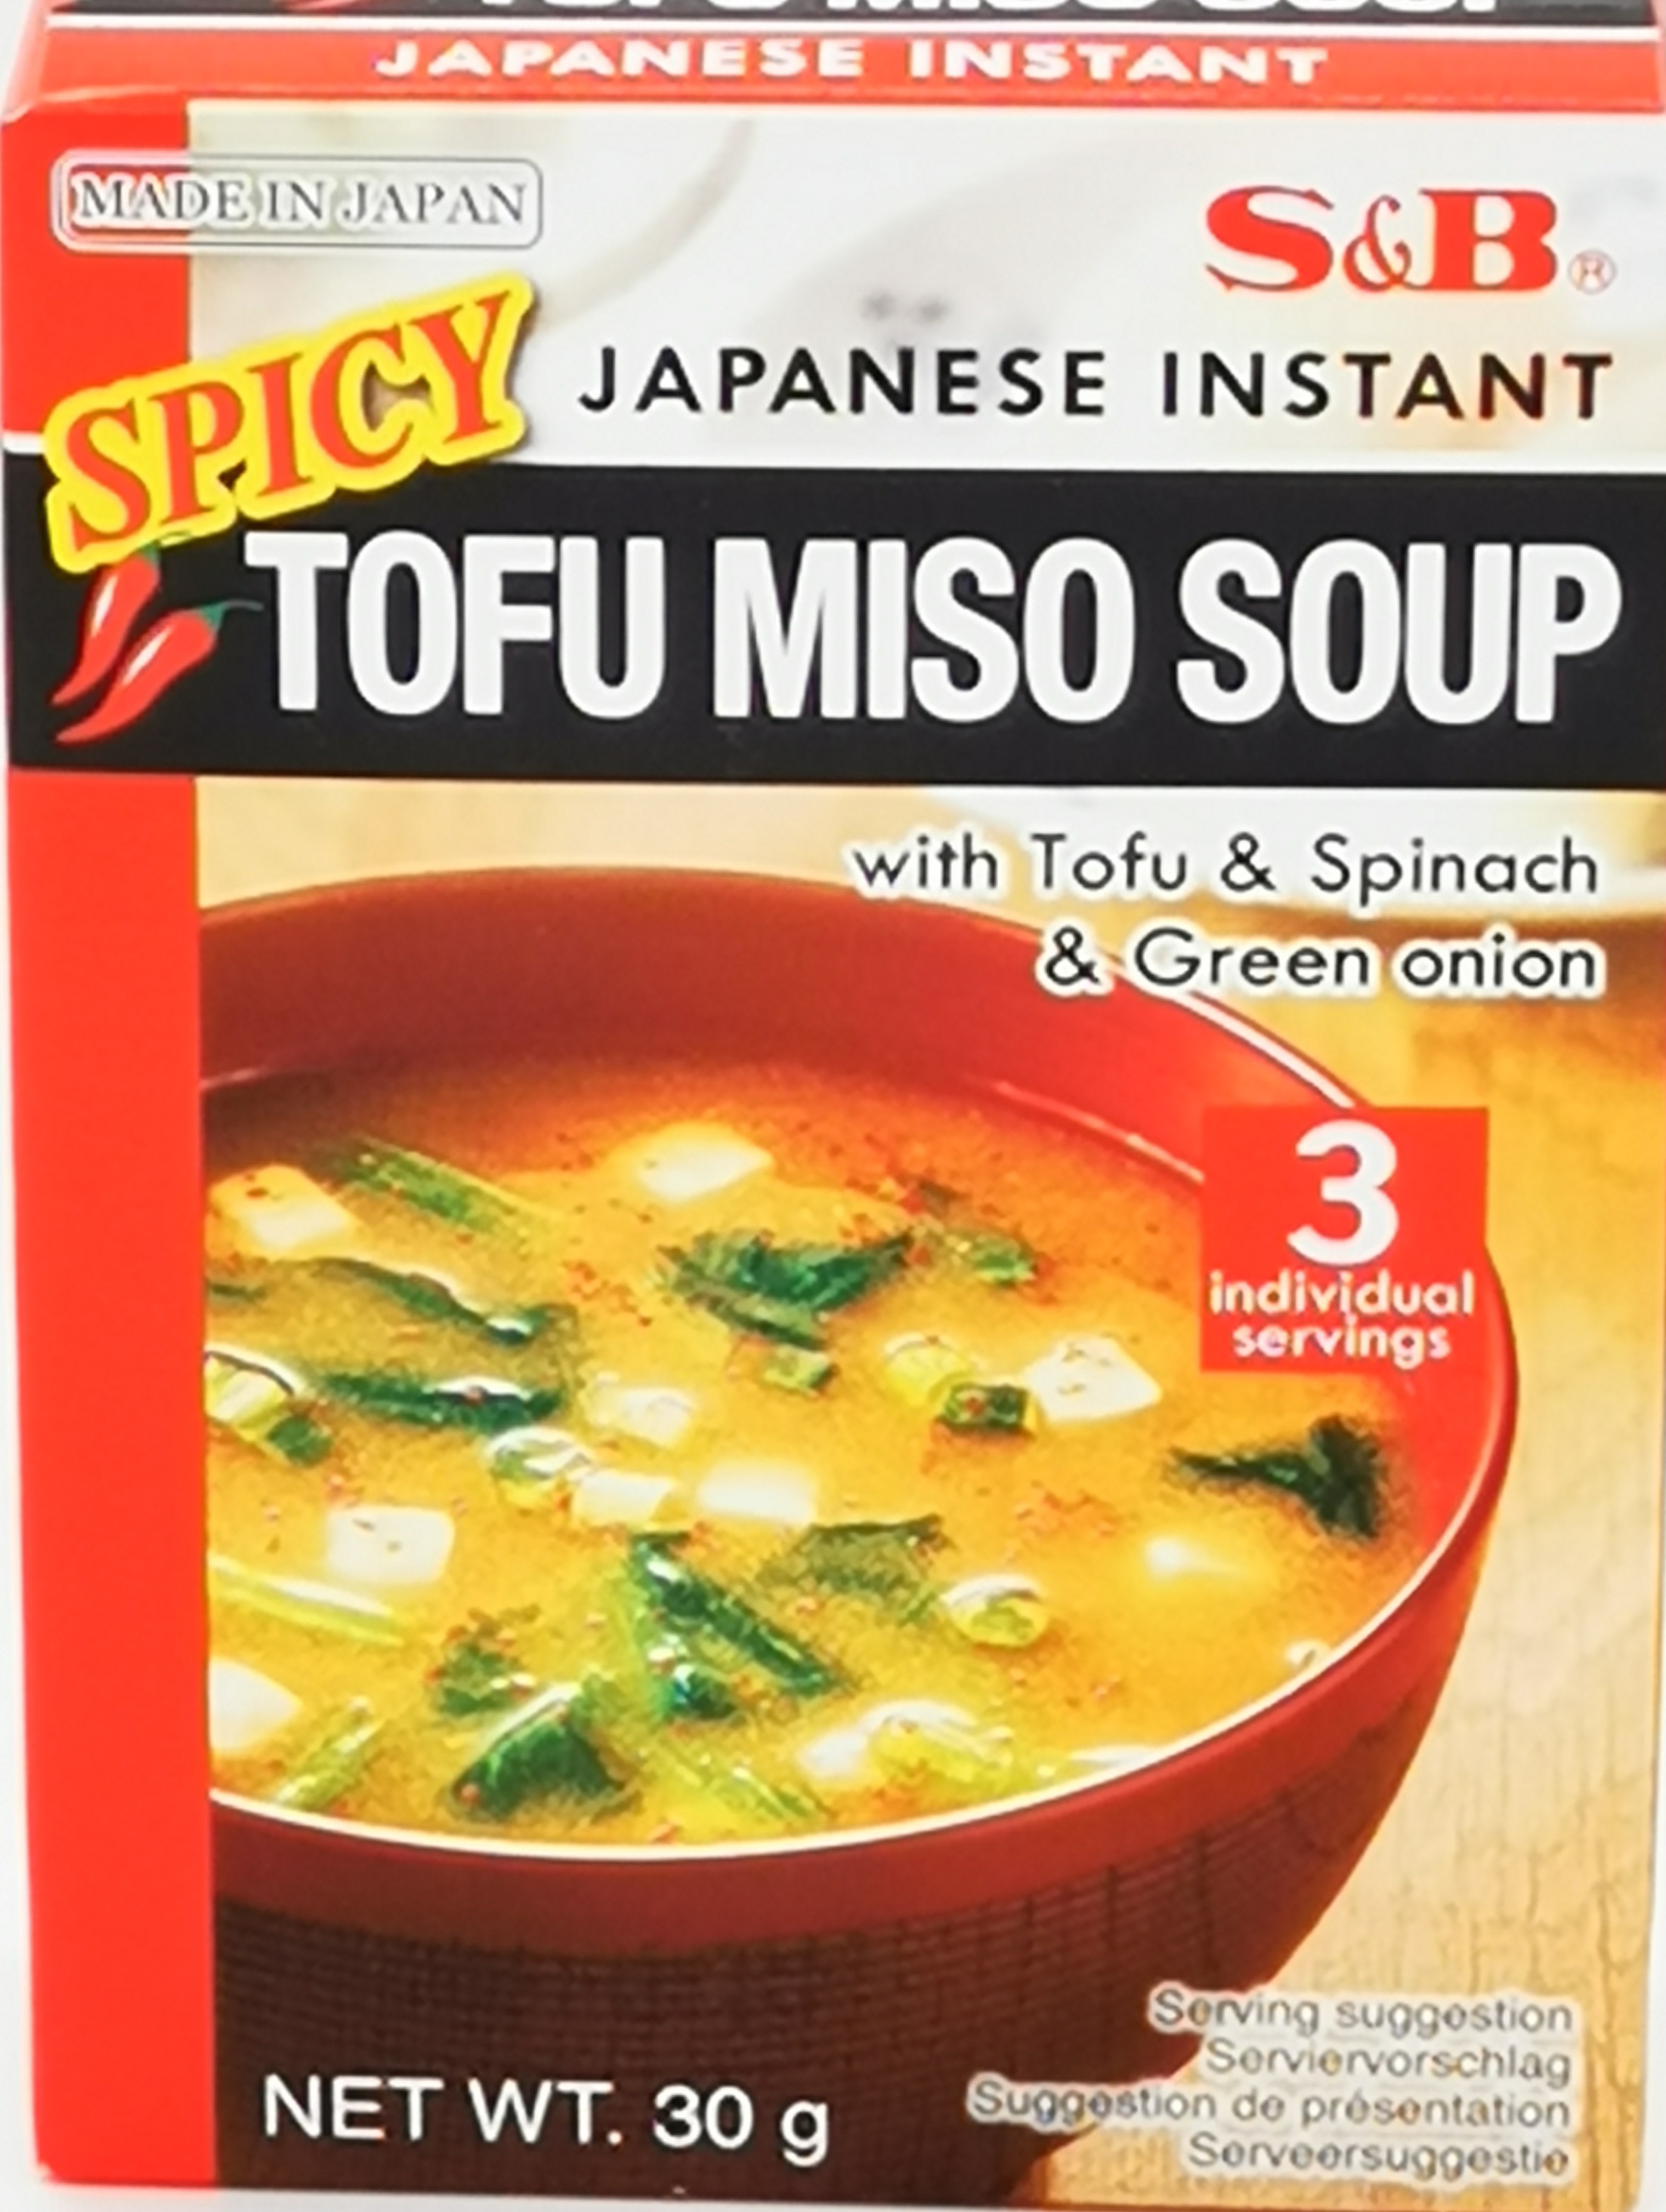 S&B Japanese Instant tofu Miso Soup 30g